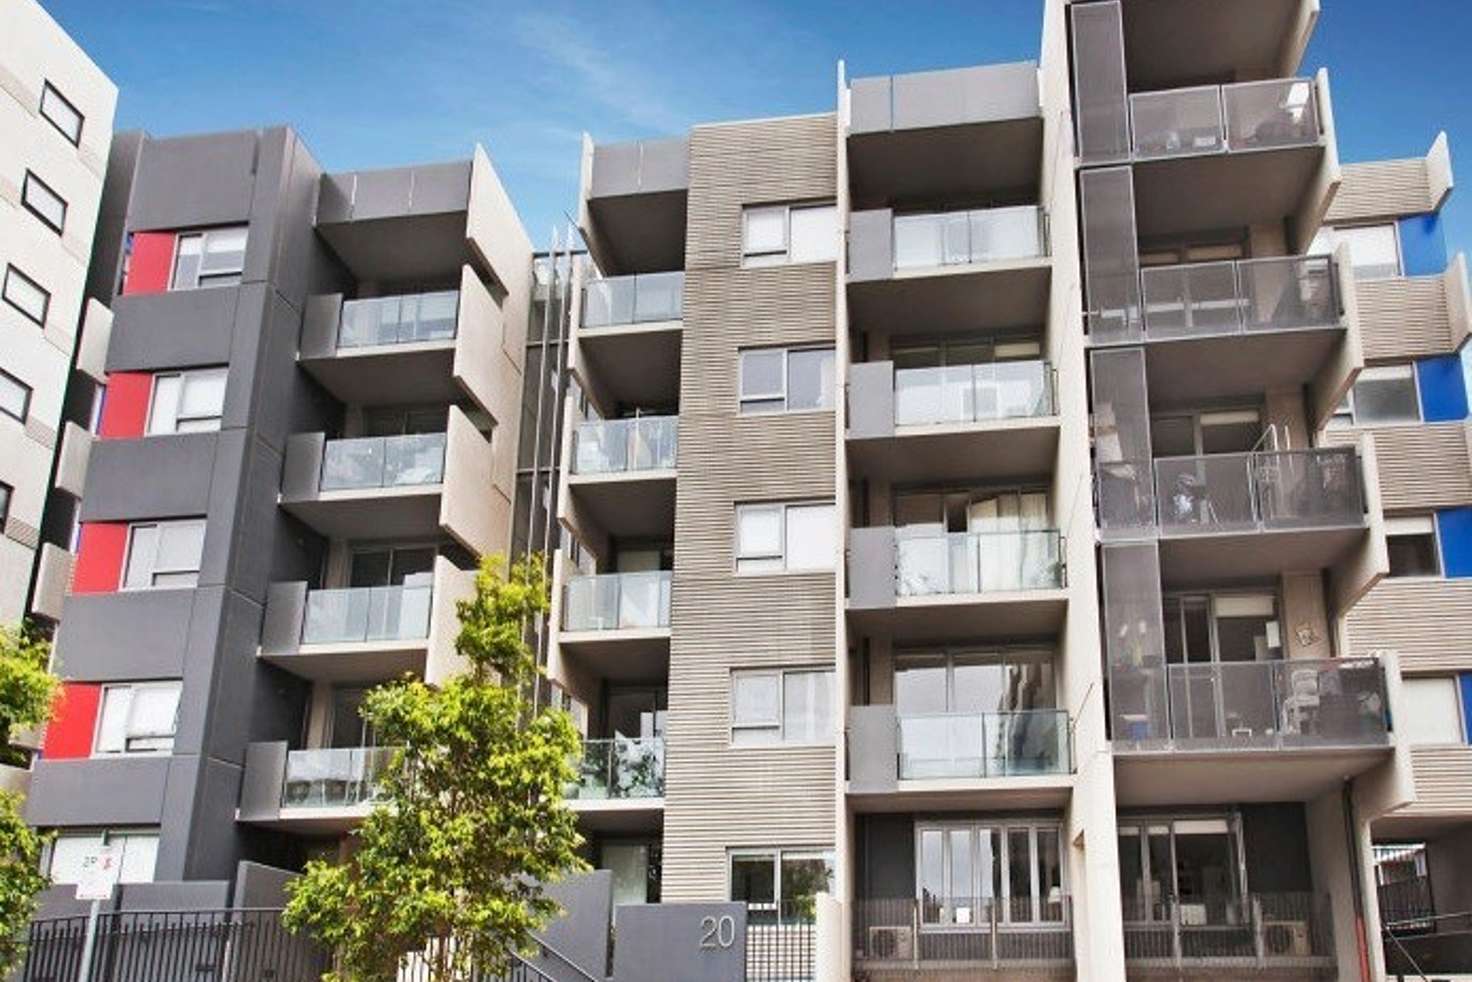 Main view of Homely apartment listing, 203/20 Reeves St,, Carlton VIC 3053